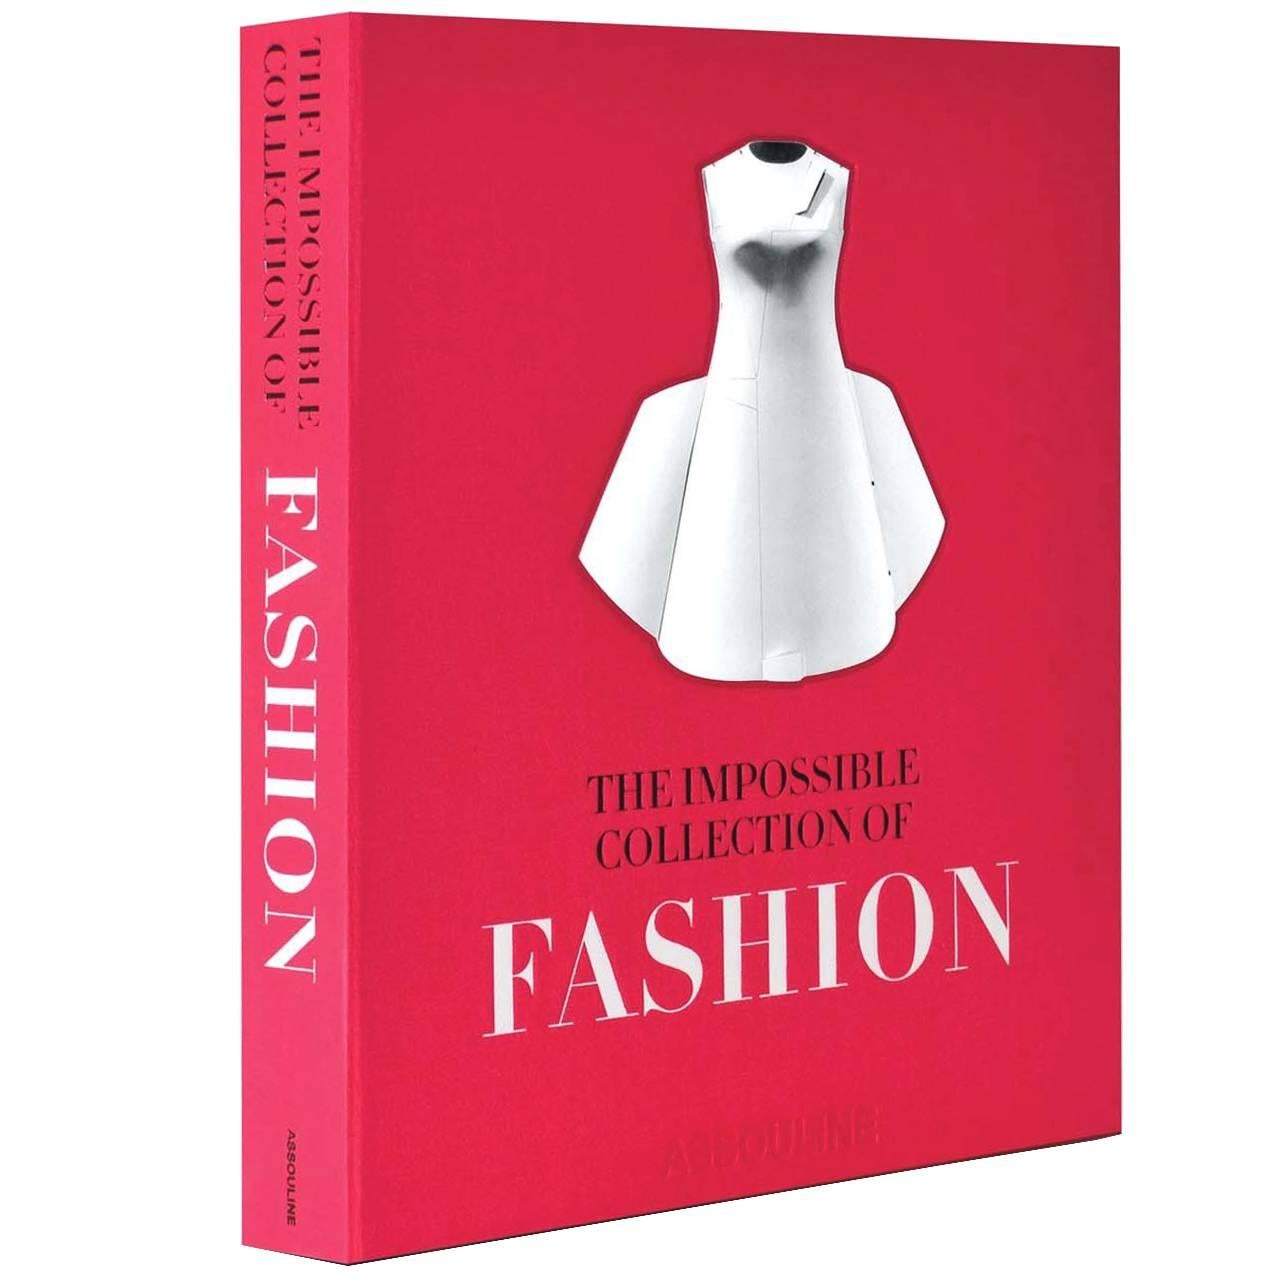 "The Impossible Collection of Fashion" Book